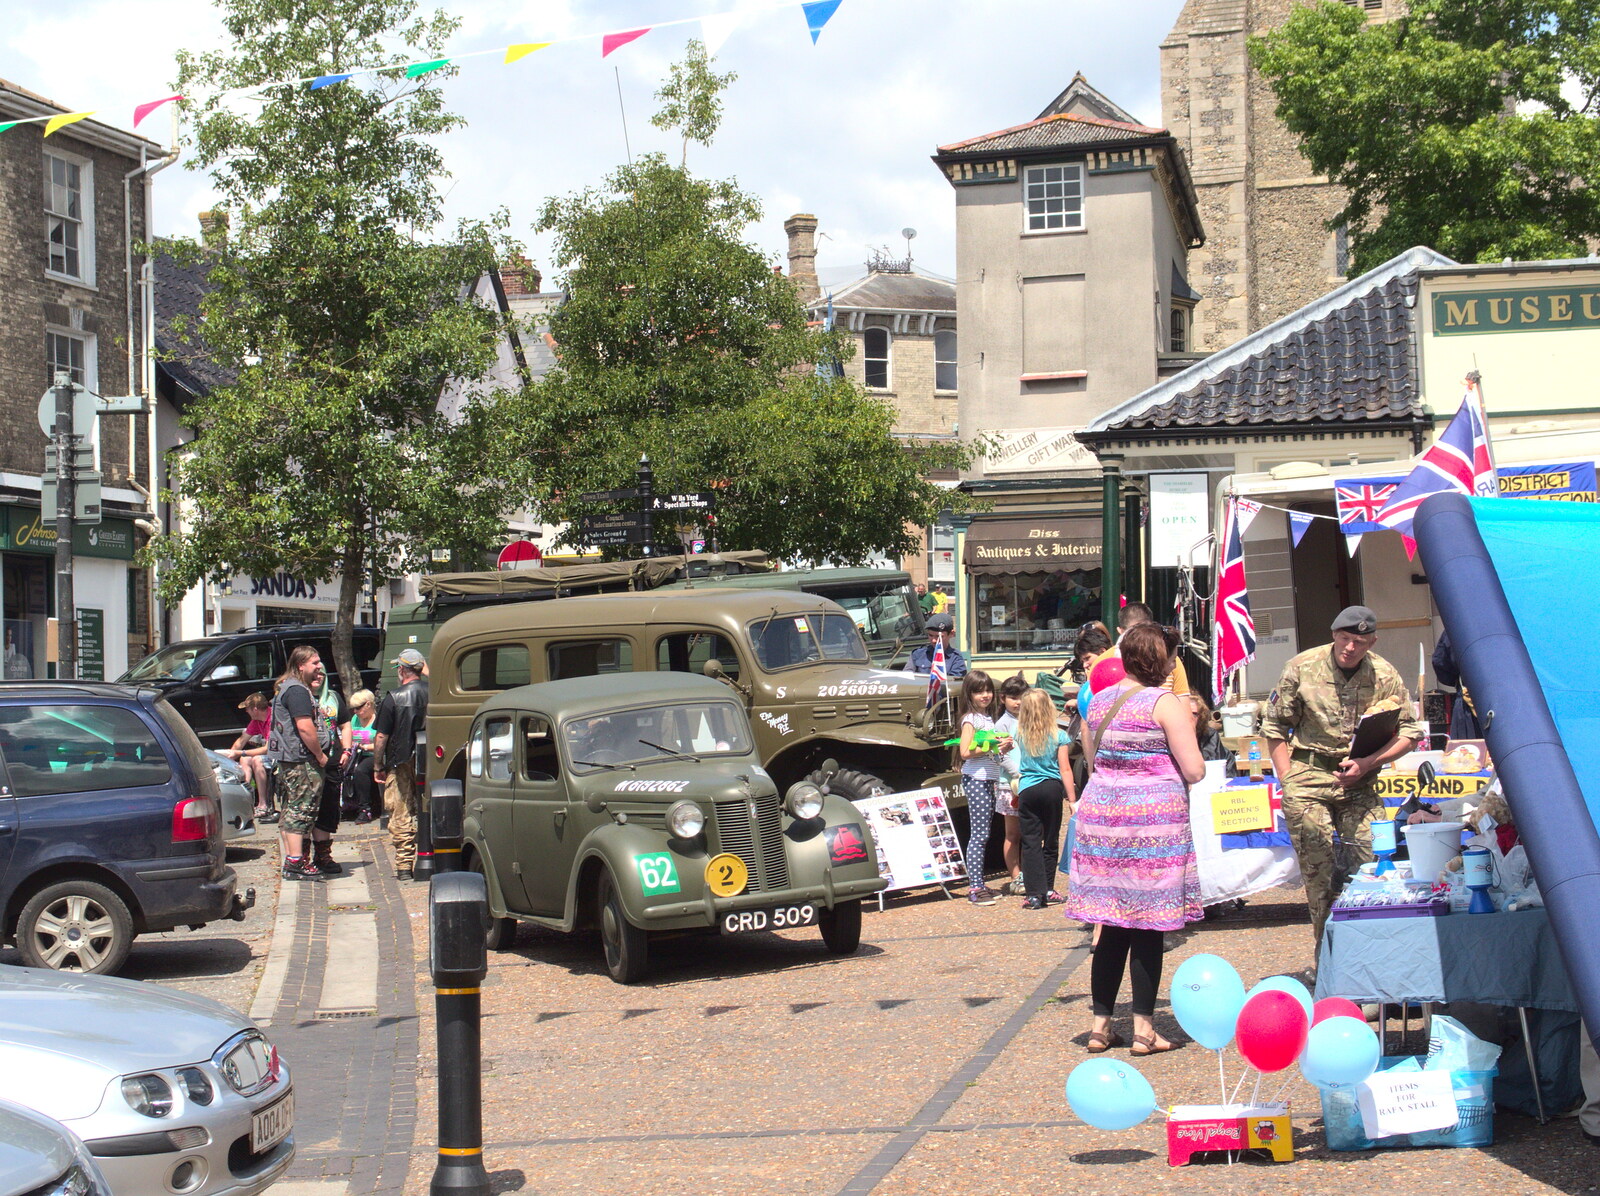 There's something military on the Market Place from A Busy Day and a Church Fair, Diss, Norfolk - 28th June 2014